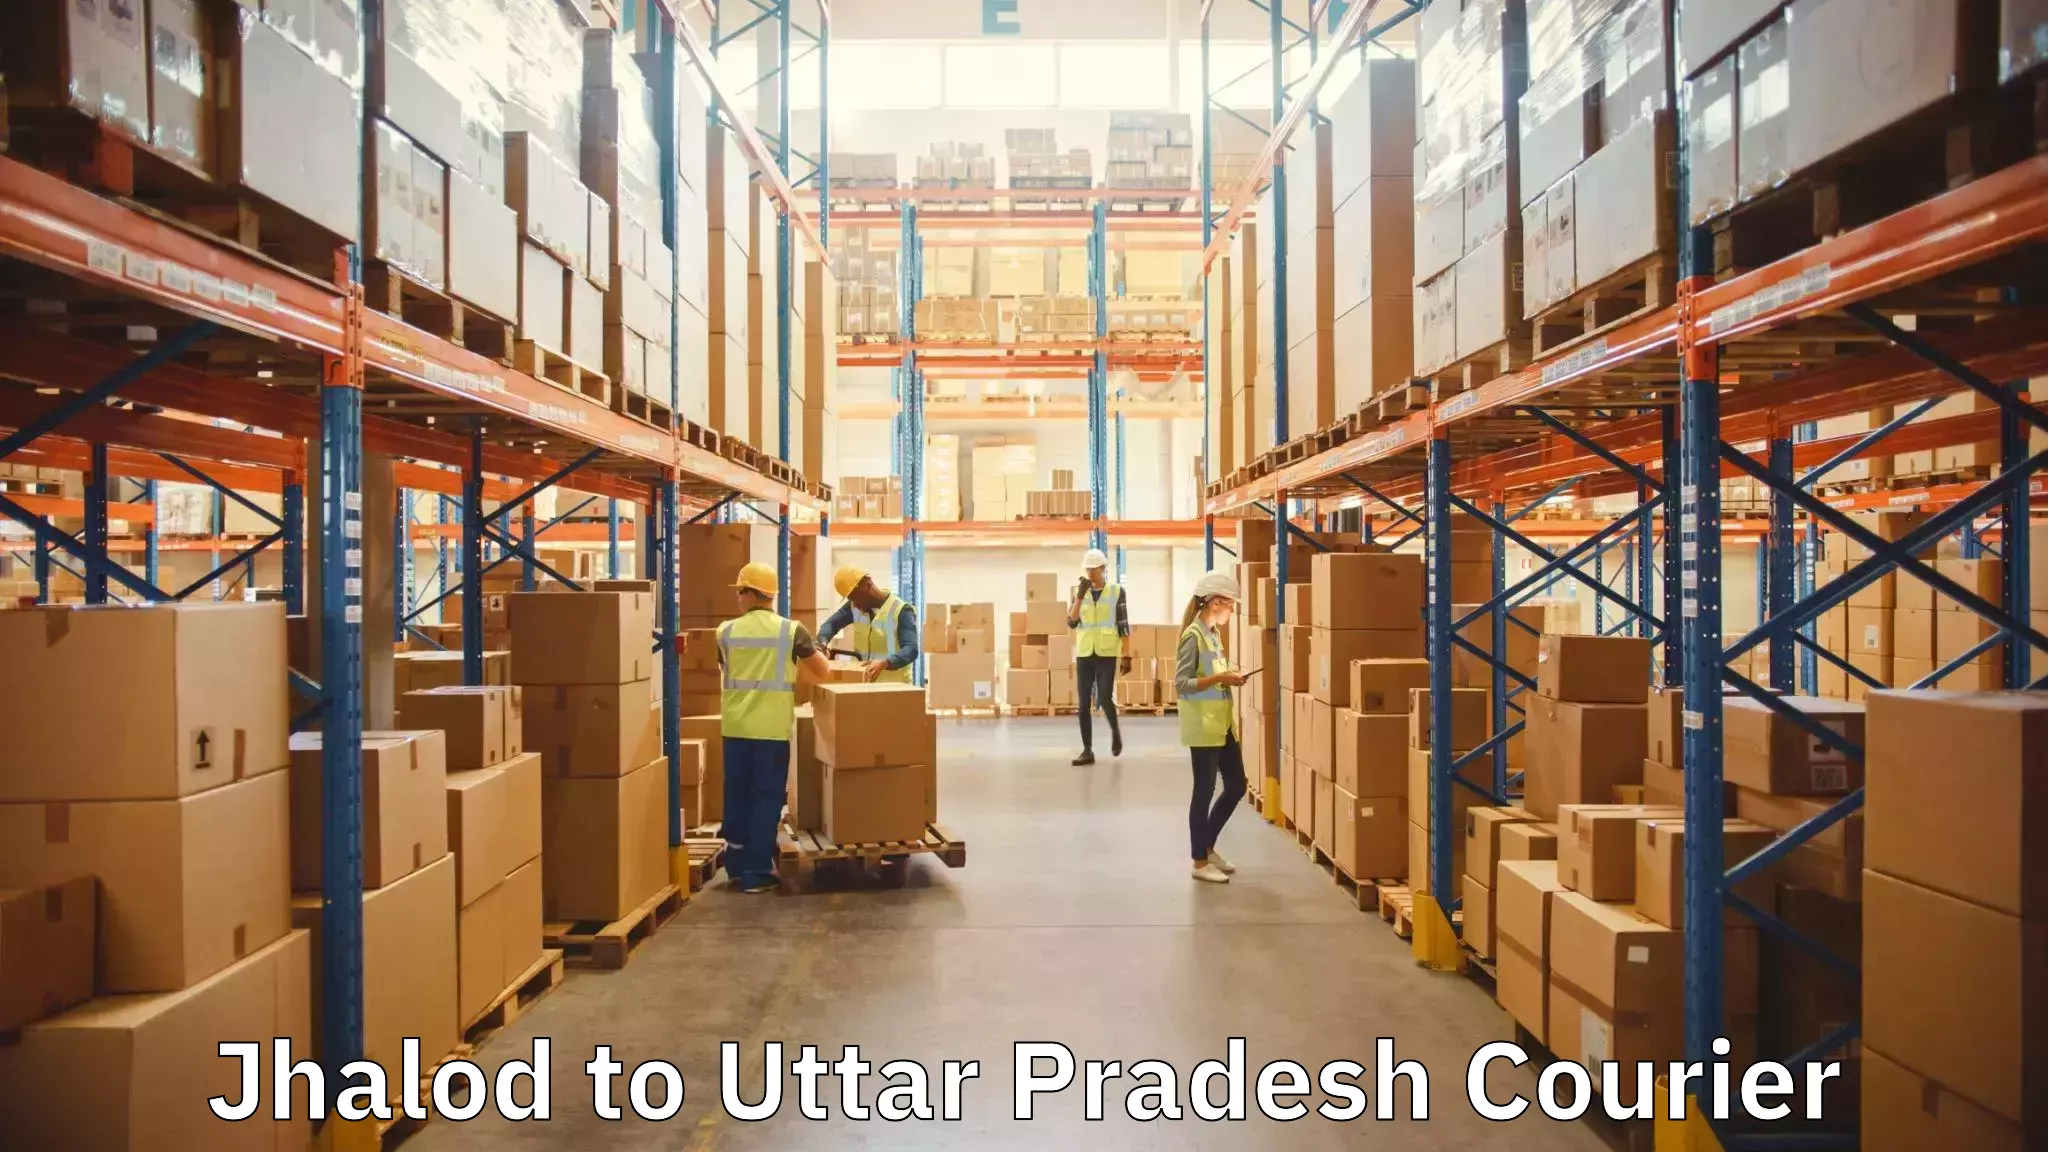 Trusted moving company Jhalod to Kanpur